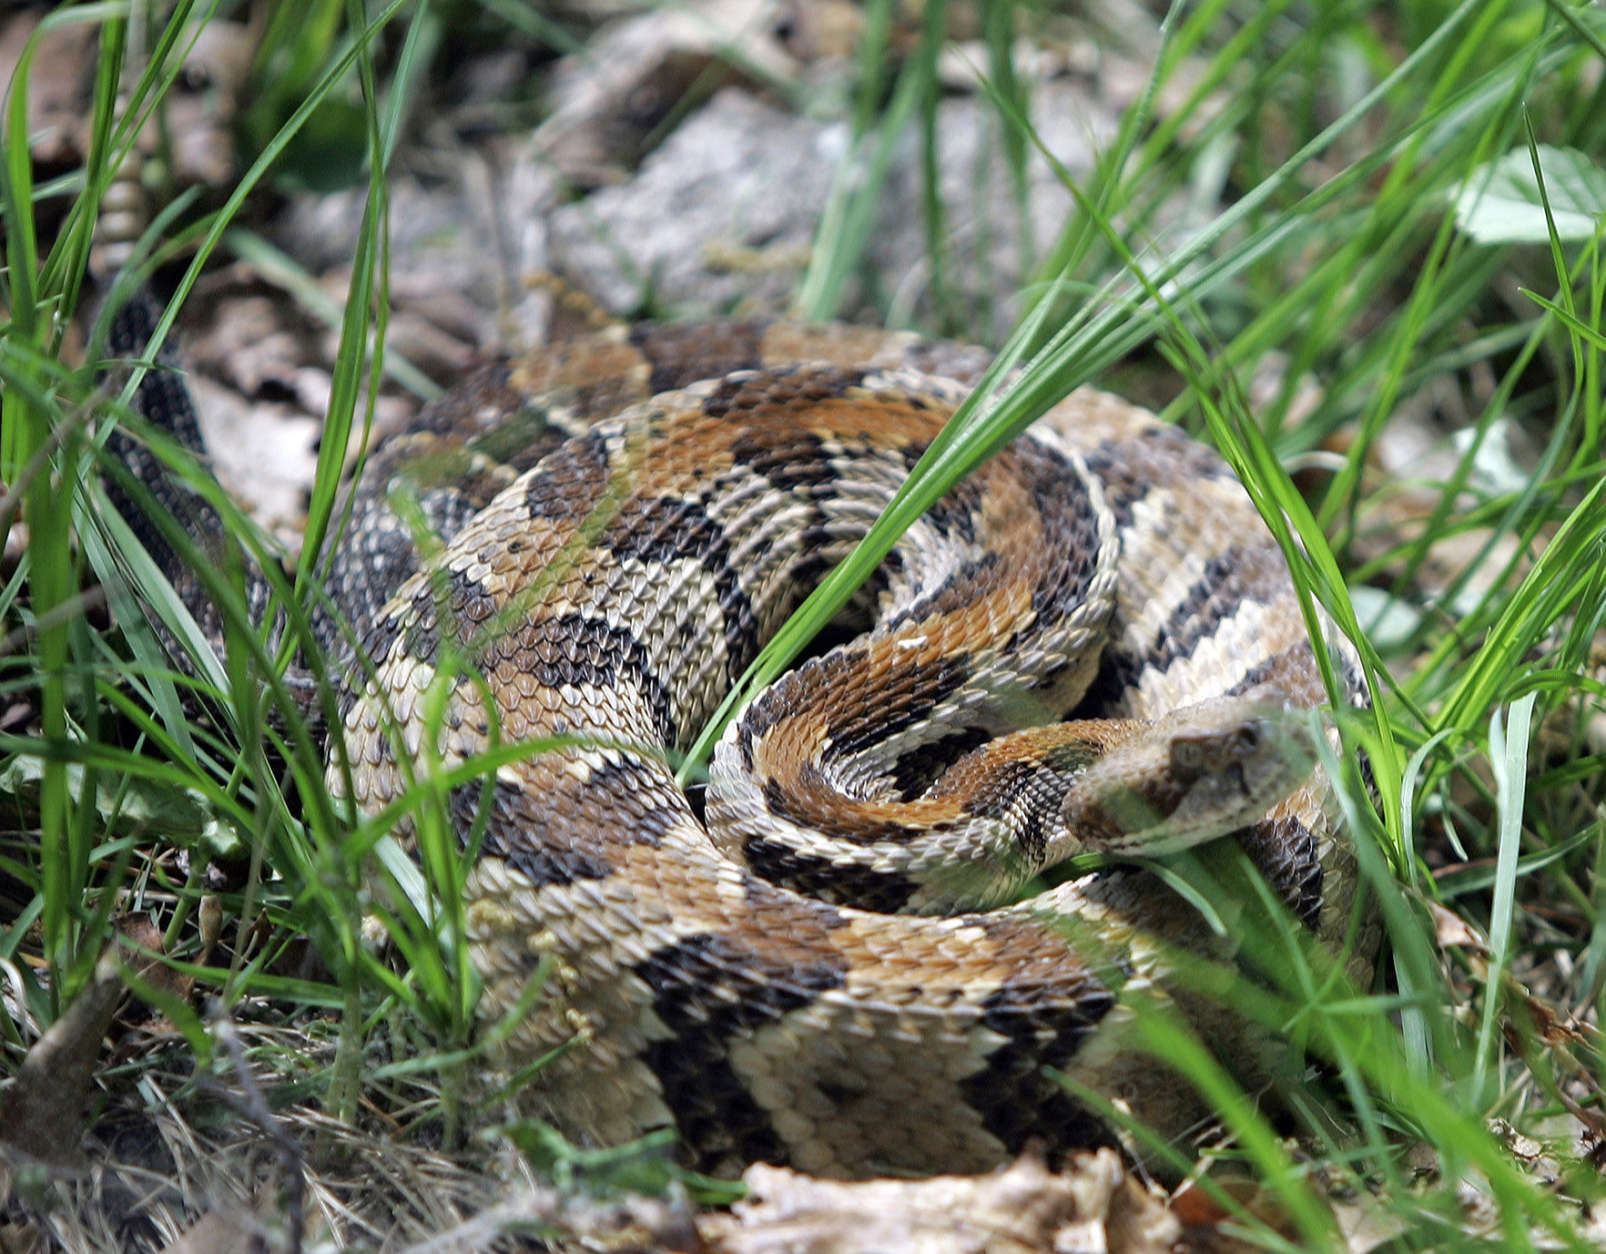 A timber rattlesnake sits coiled on section of a trail in Mountaintown, Ga., Wednesday, May 23, 2007. Fortunately Maryland and Northern Virginia is home to only two types of poisonous snakes, the timber rattlesnake and the copperhead. (AP Photo/John Bazemore)